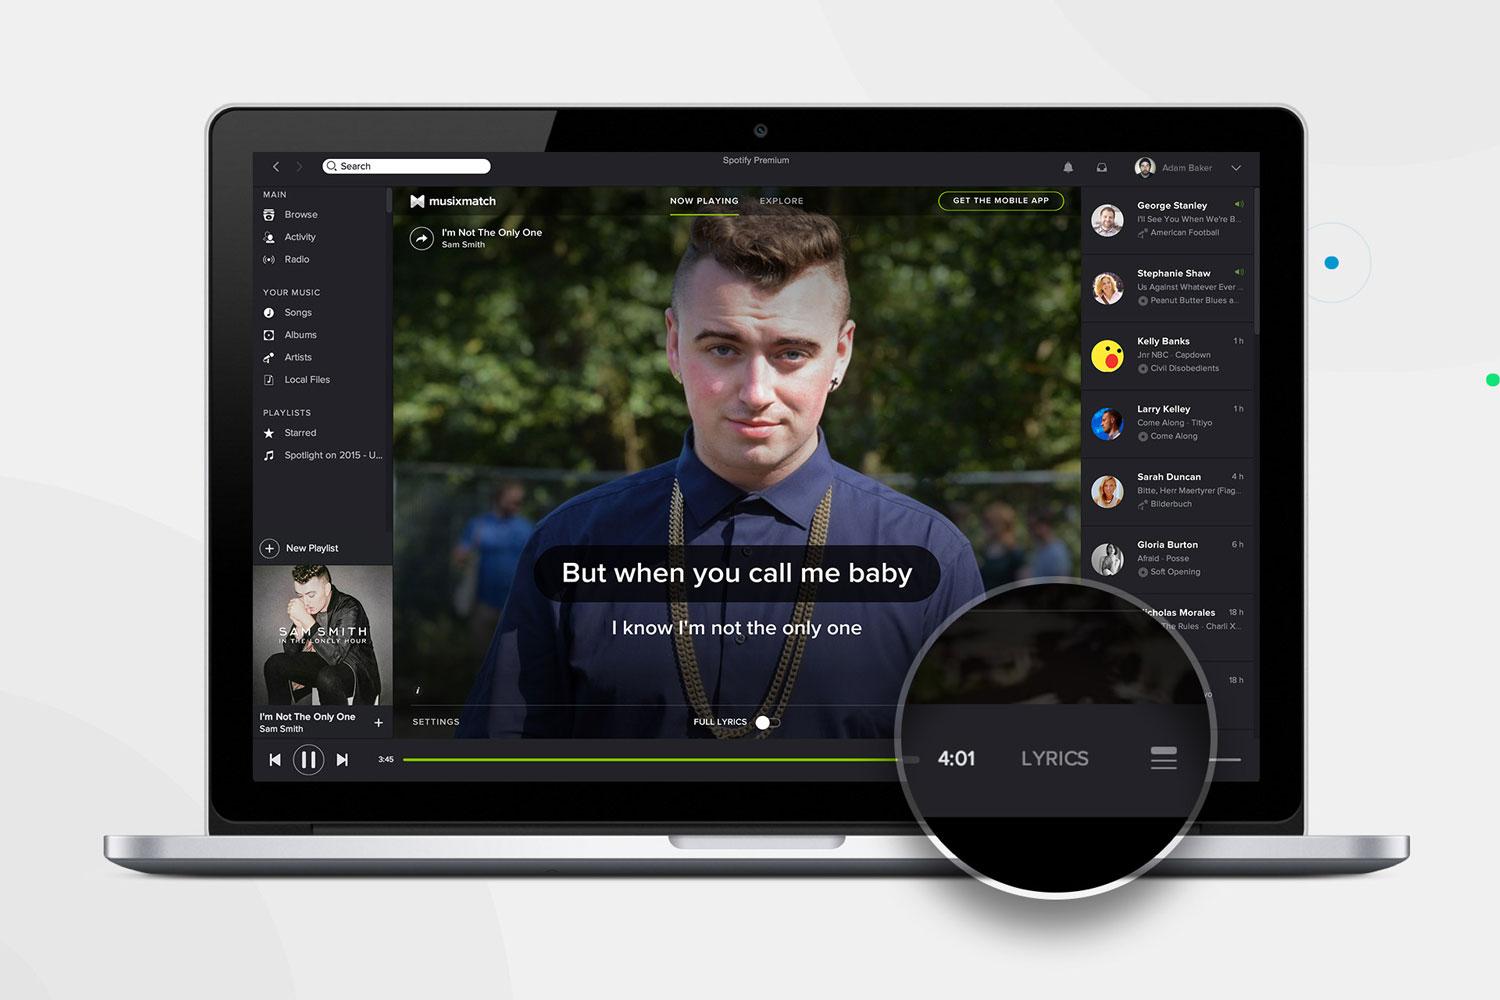 spotify adds lyrics to desktop app so you can annoy the hell out of everyone nearby samsmith edit press image